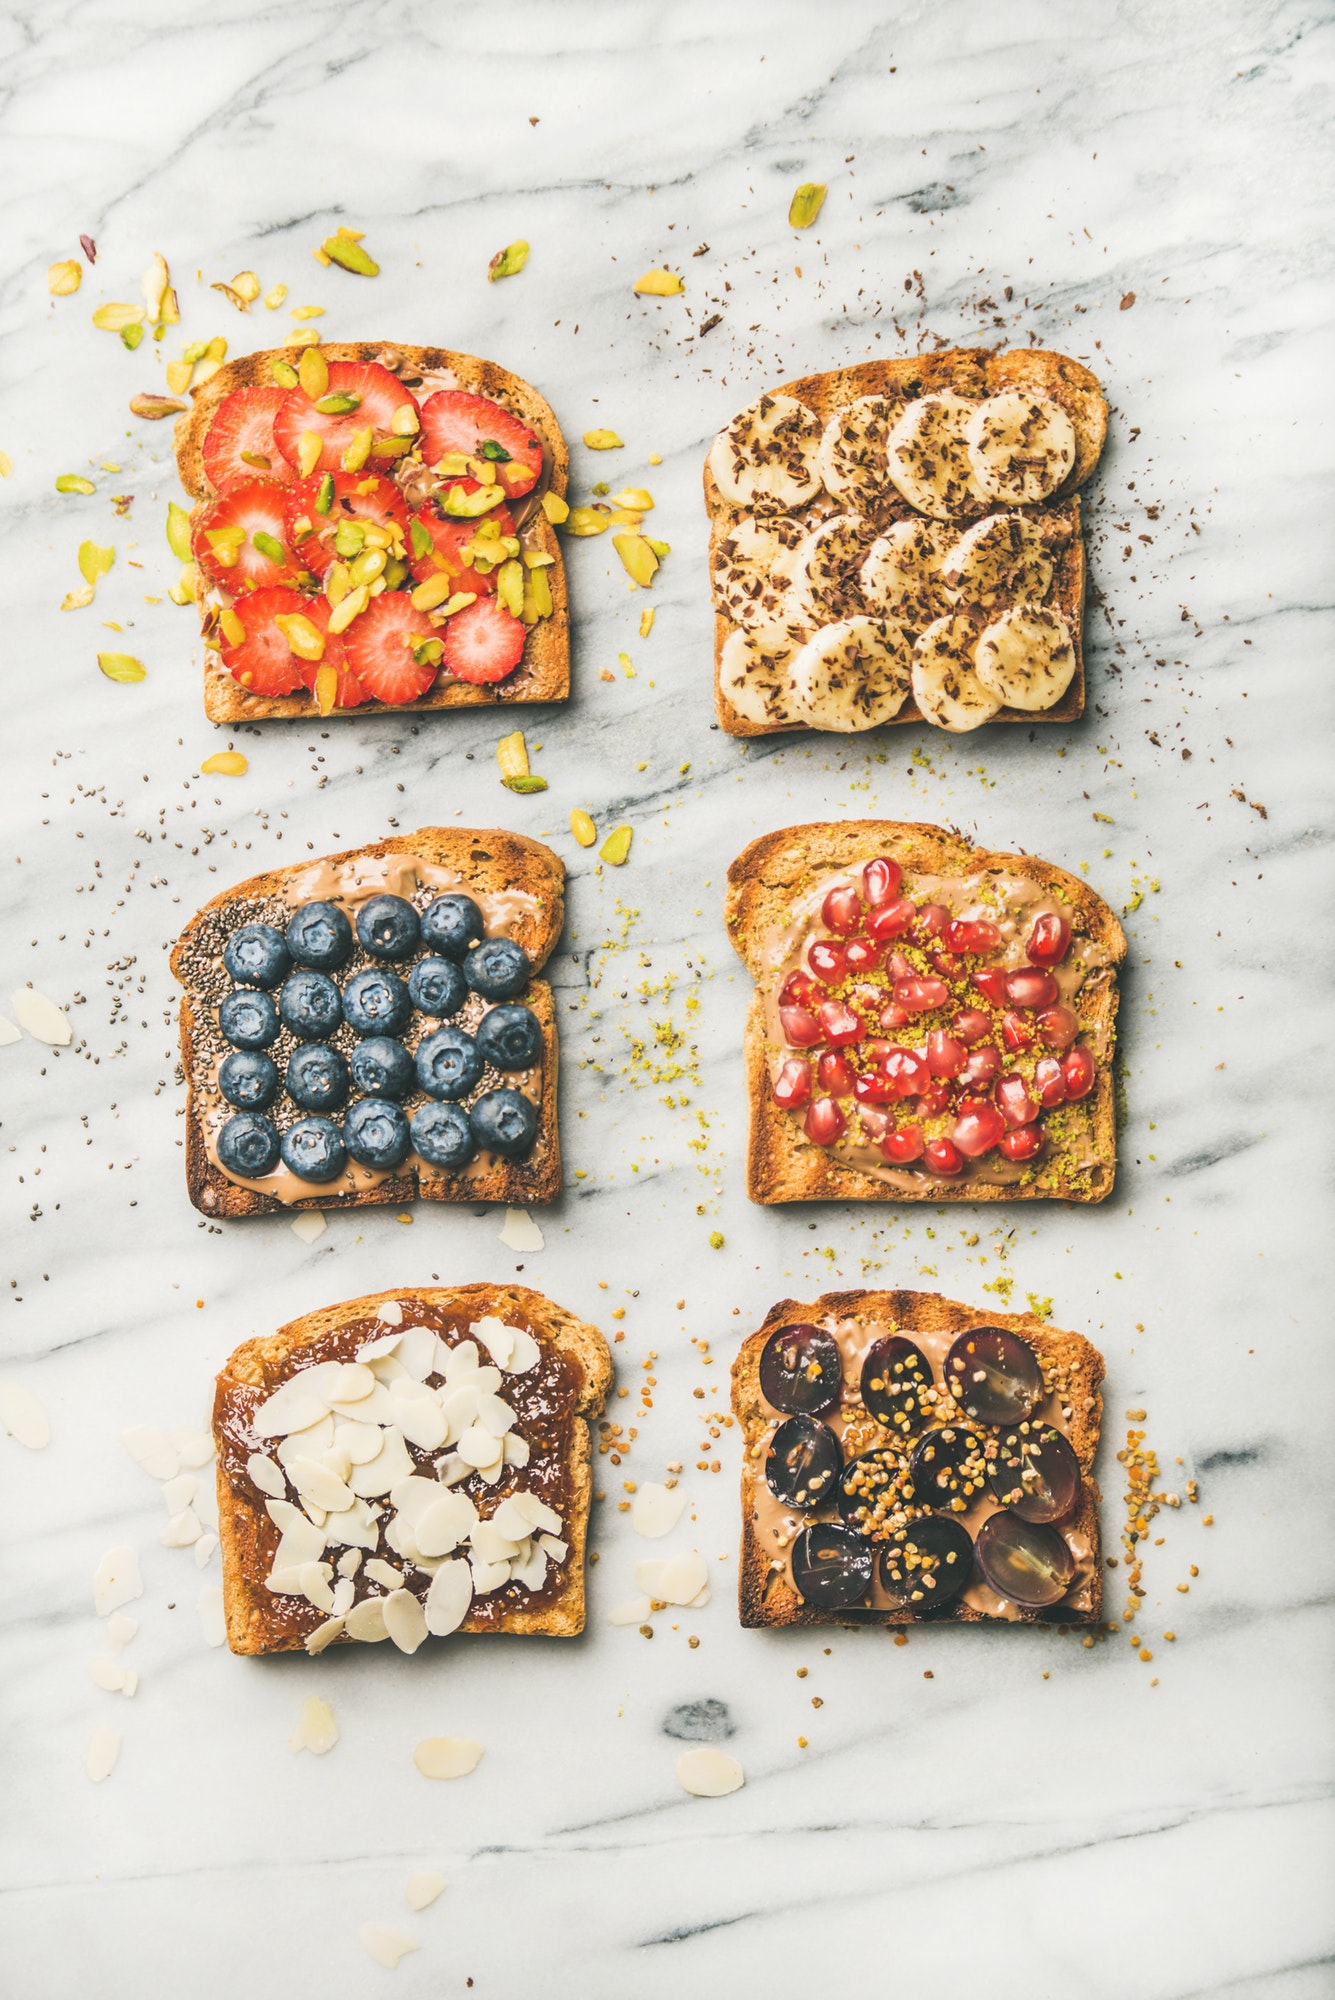 Vegan toasts with fruit, seeds, nuts and peanut butter